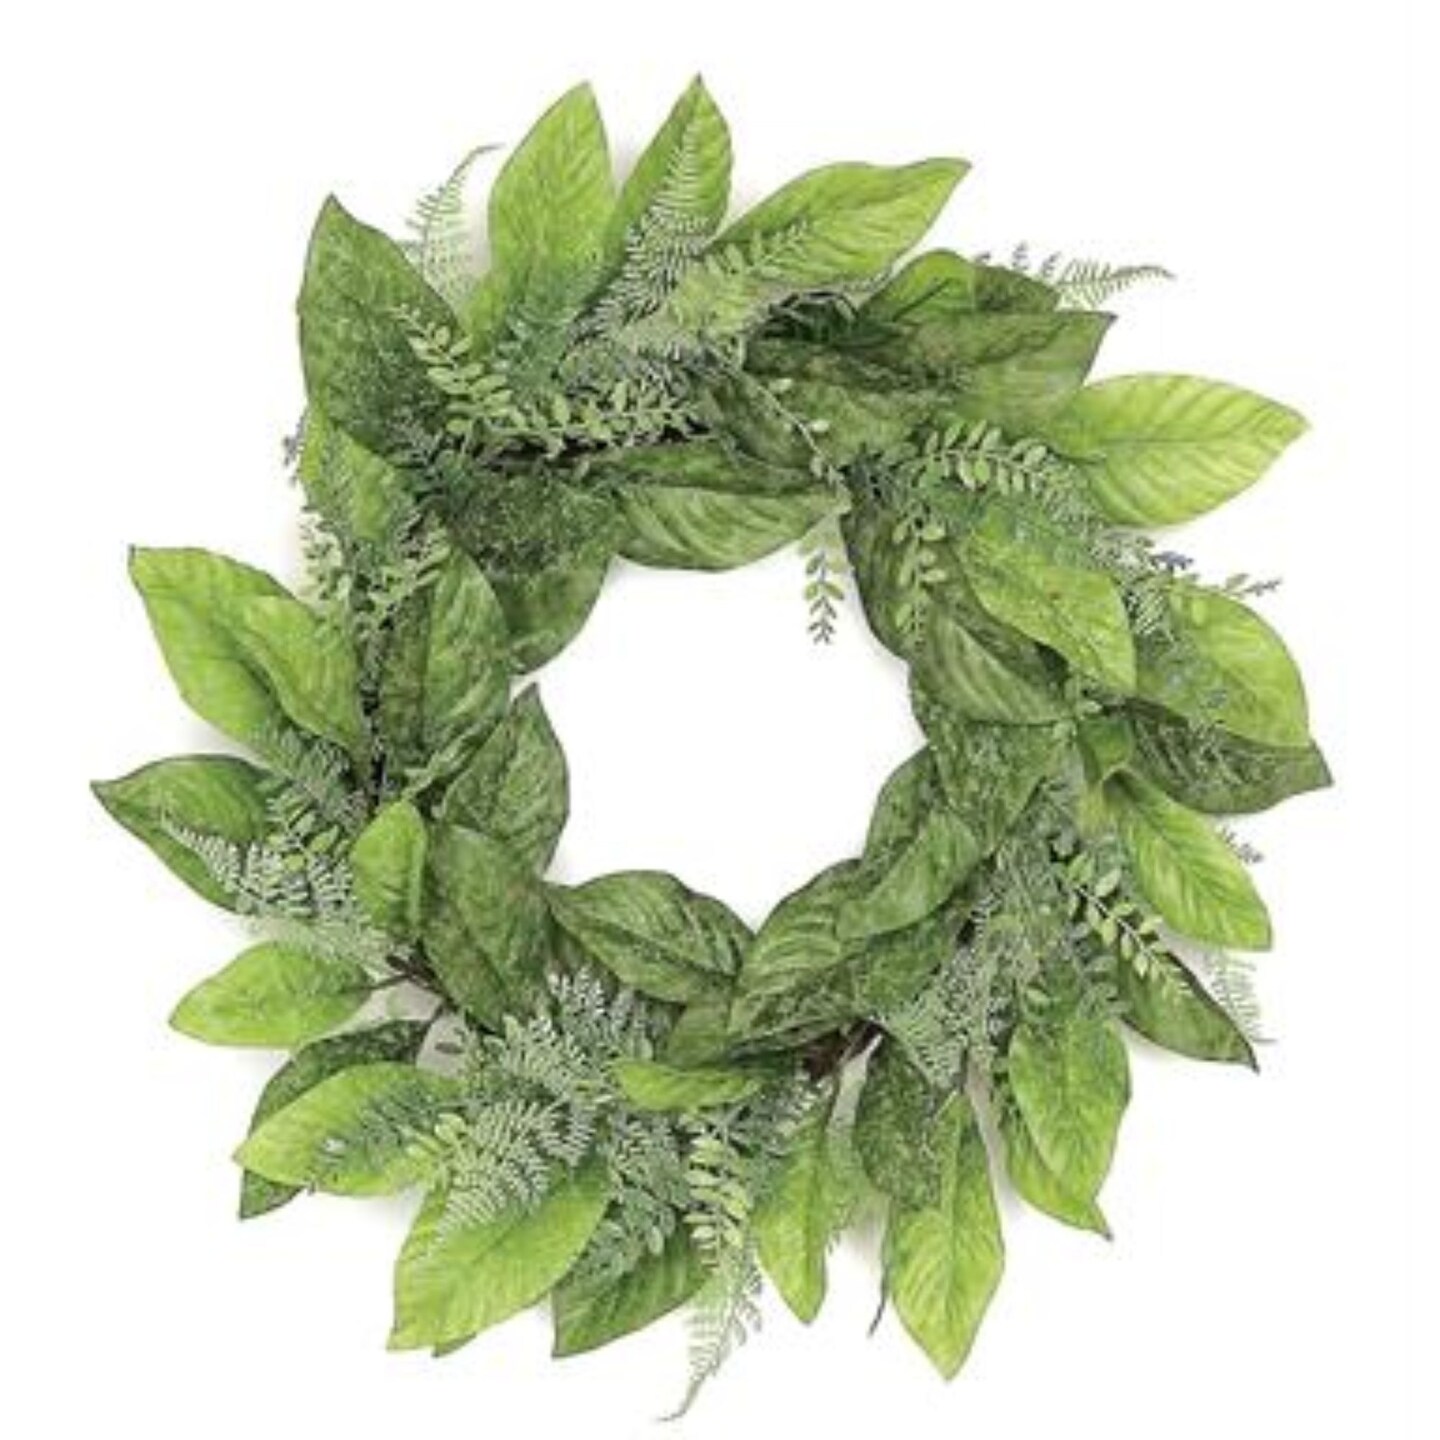 Select Artificials Magnolia Foliage, Ferns and Tea Leaves Artificial Spring Wreath, Green 24-Inch